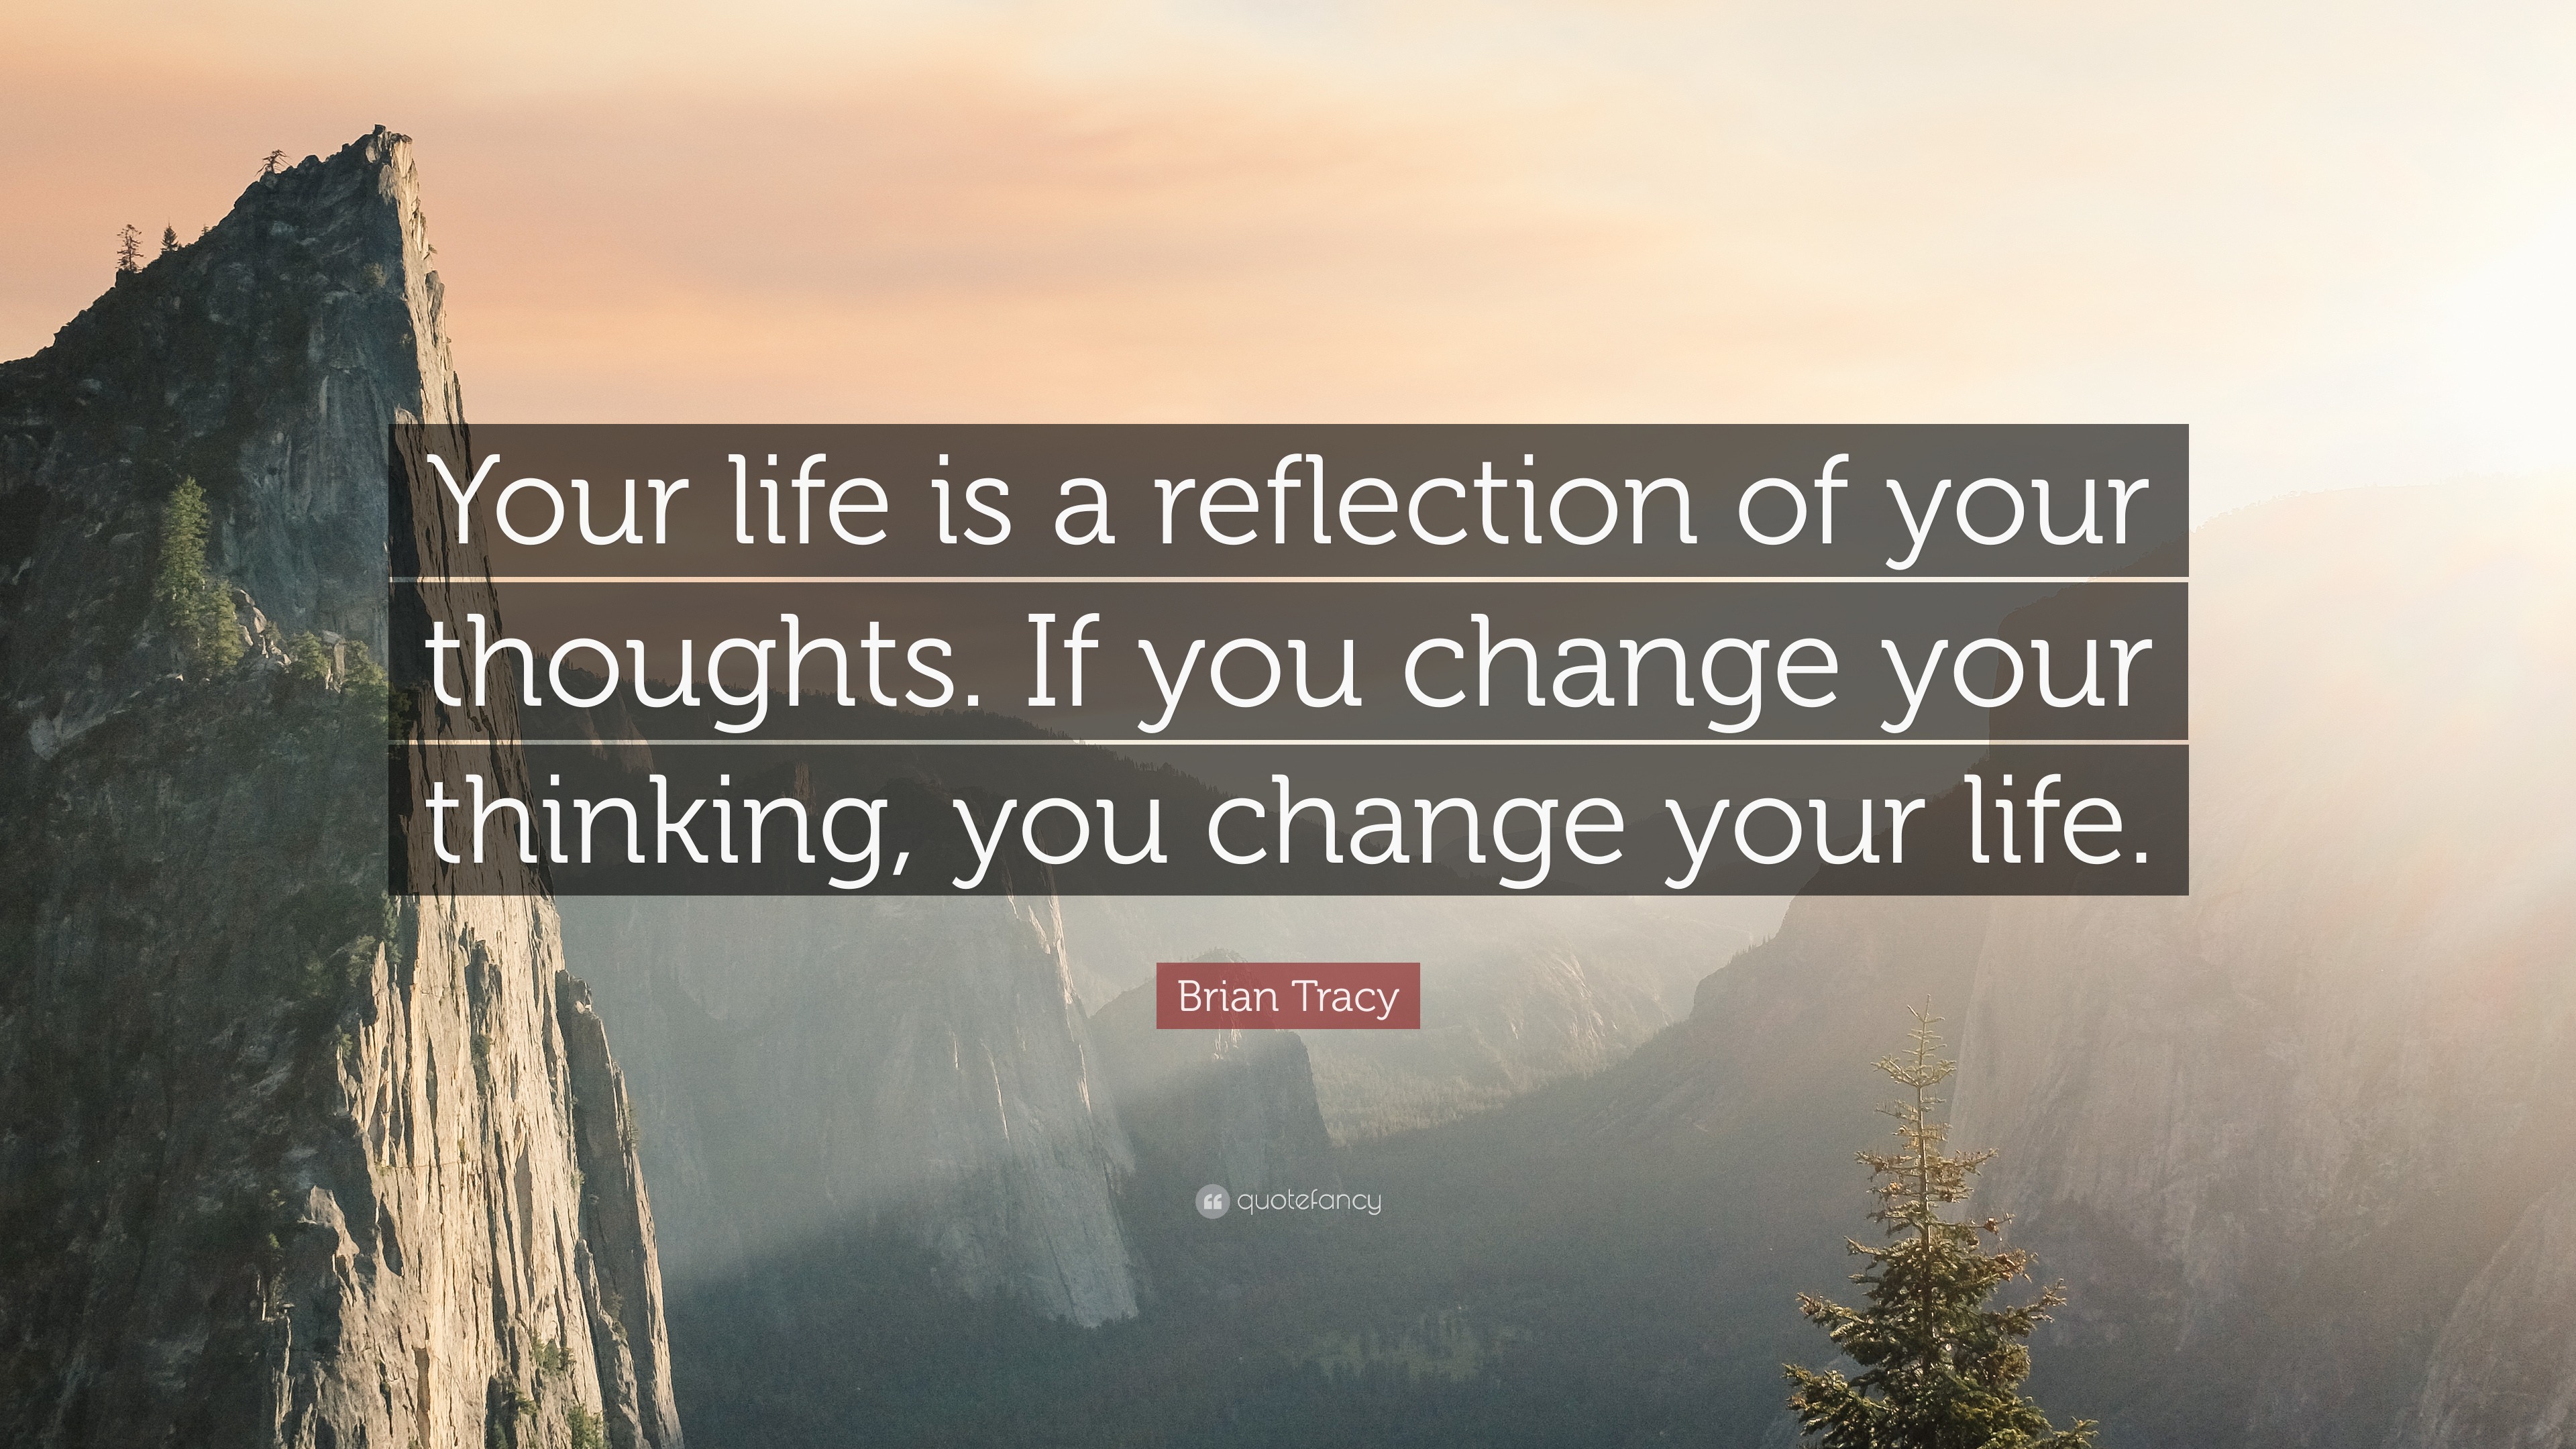 Brian Tracy Quote “Your life is a reflection of your